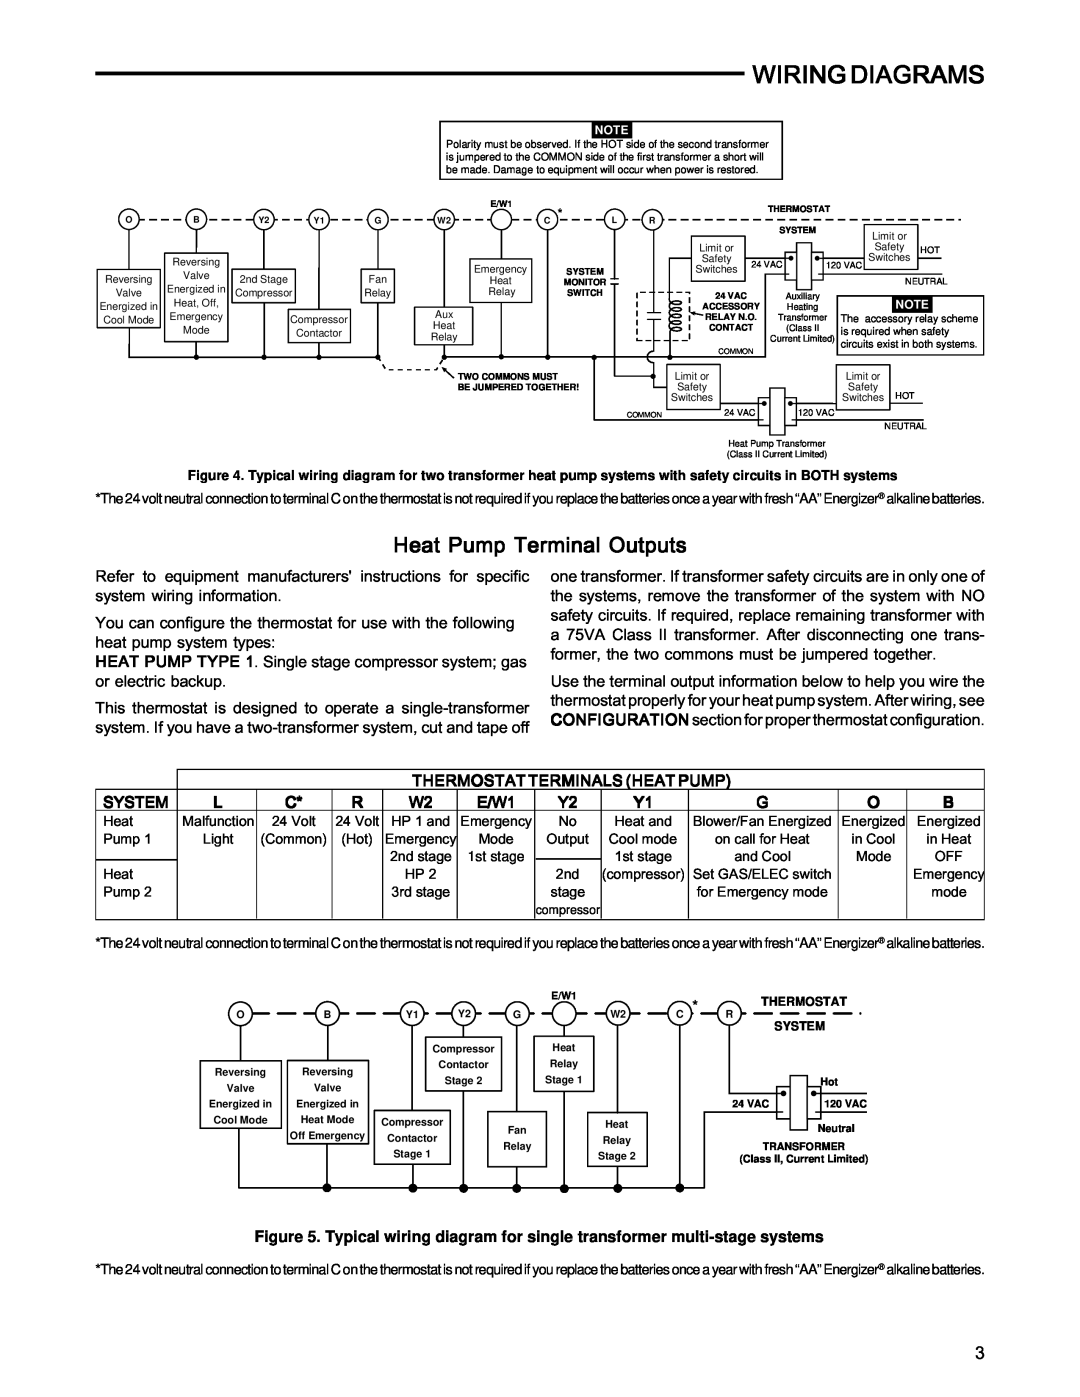 White Rodgers 1F85-277 installation instructions Wiring Diagrams, Heat Pump Terminal Outputs 